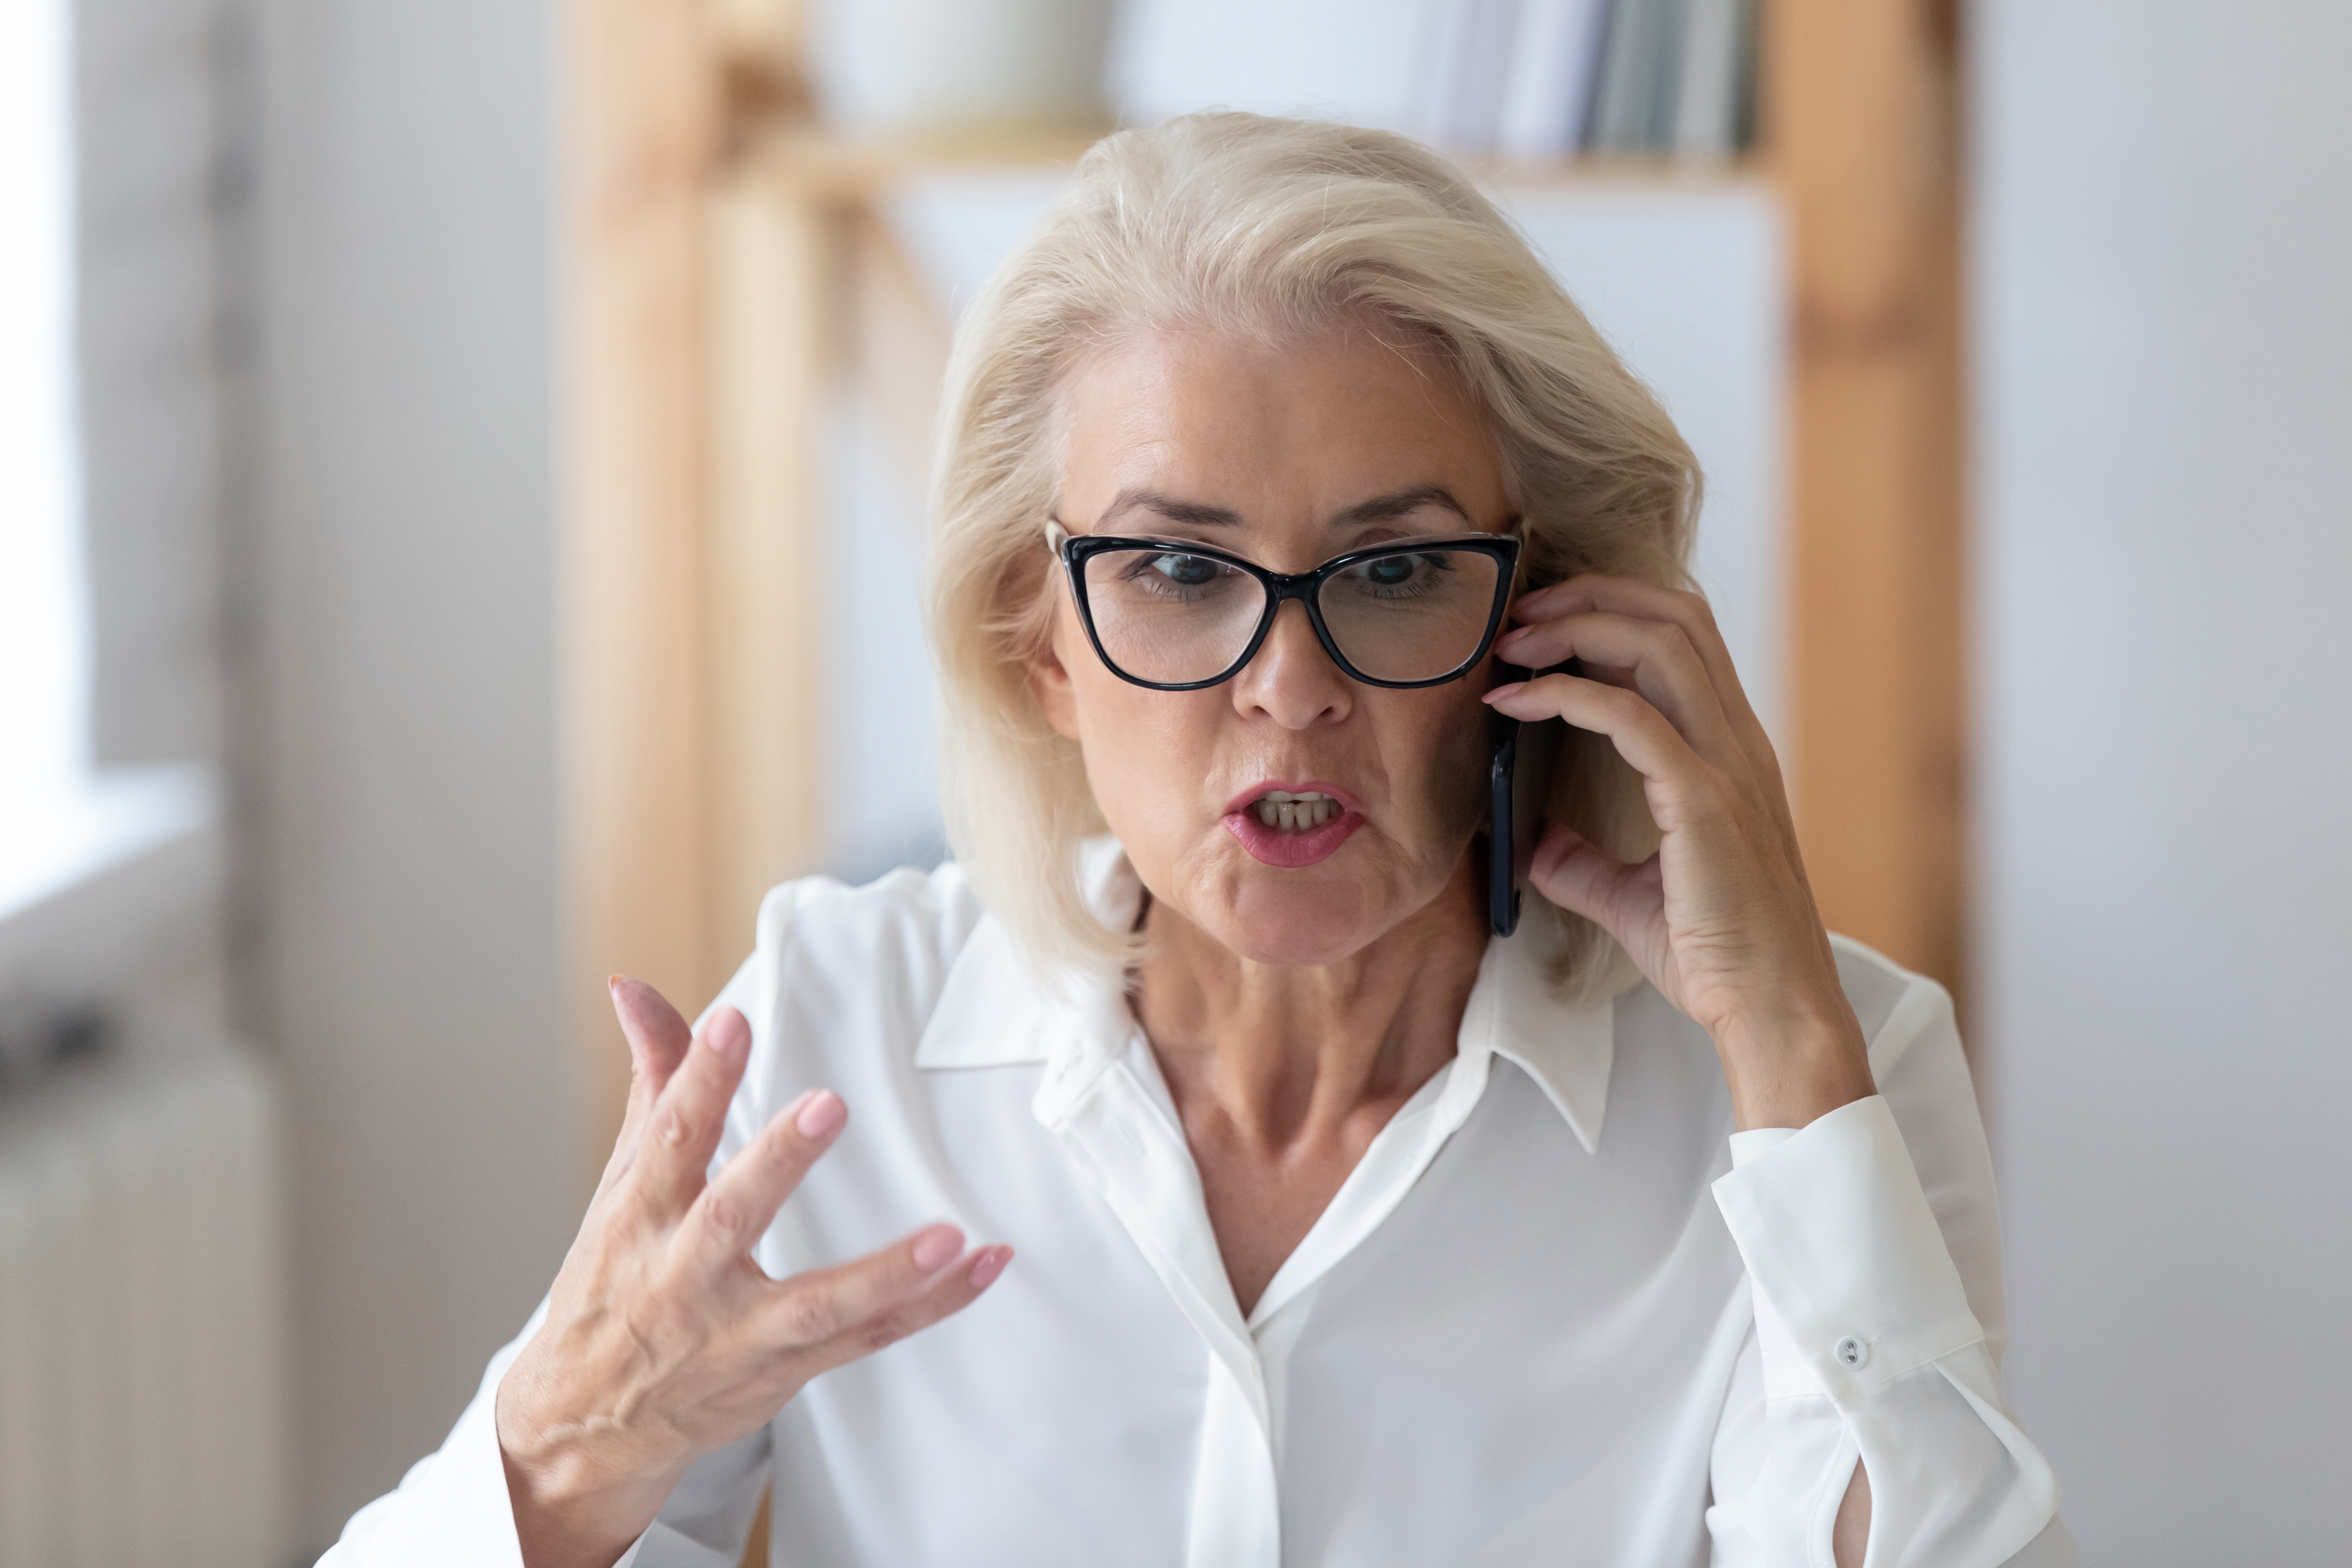 A stressed senior woman on the phone | Source: Shutterstock